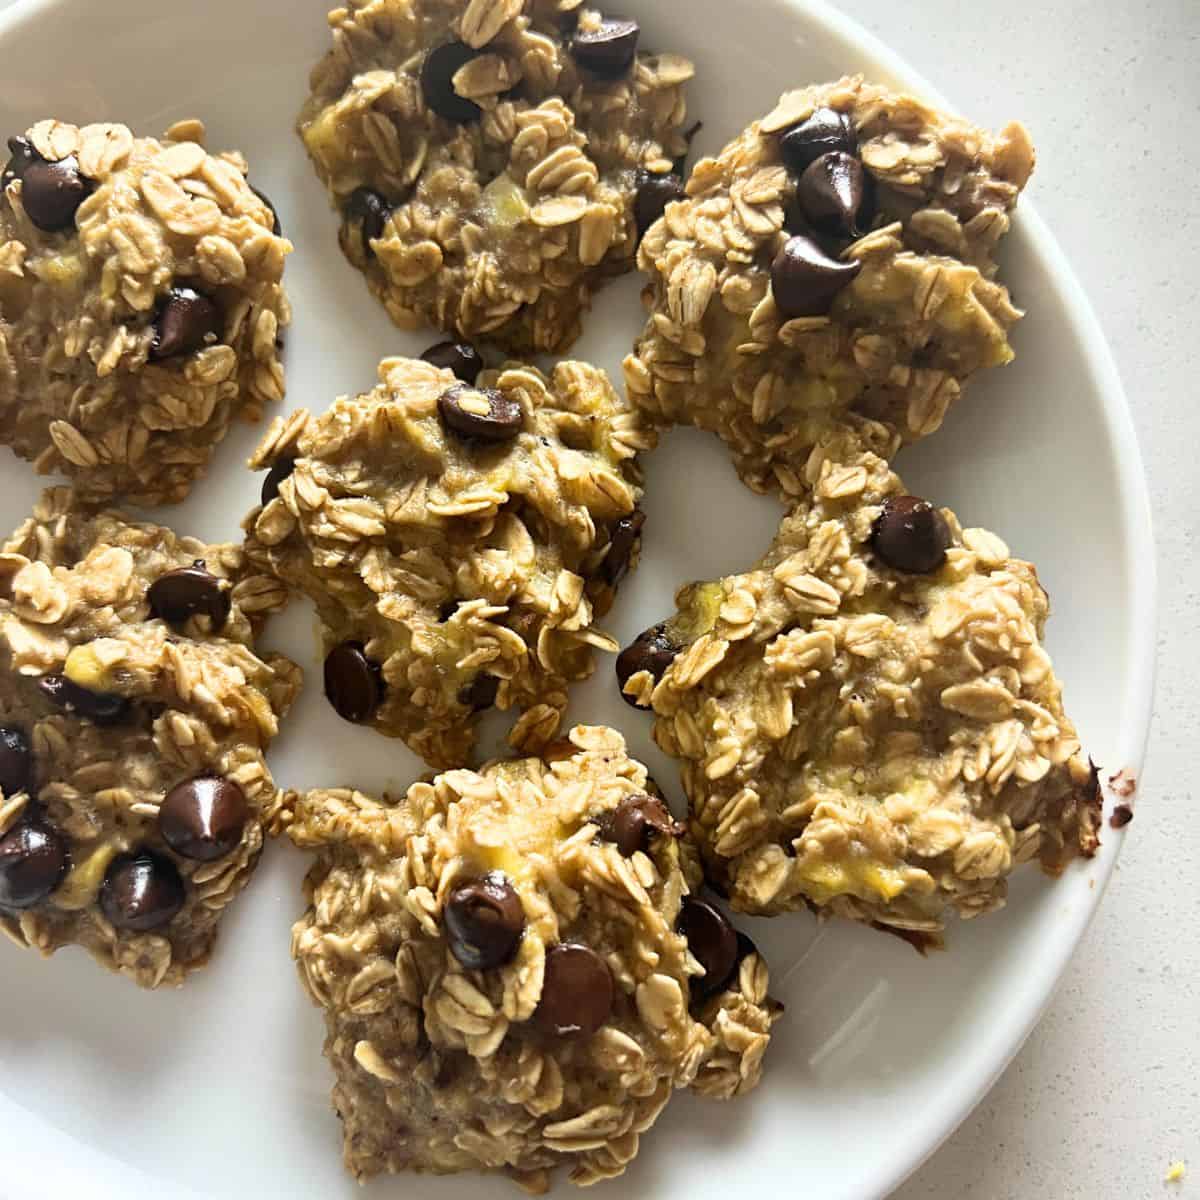 Oatmeal cookies made with banana for the sweetener are a delightful and healthy treat that can be whipped up in no time with just three simple ingredients.